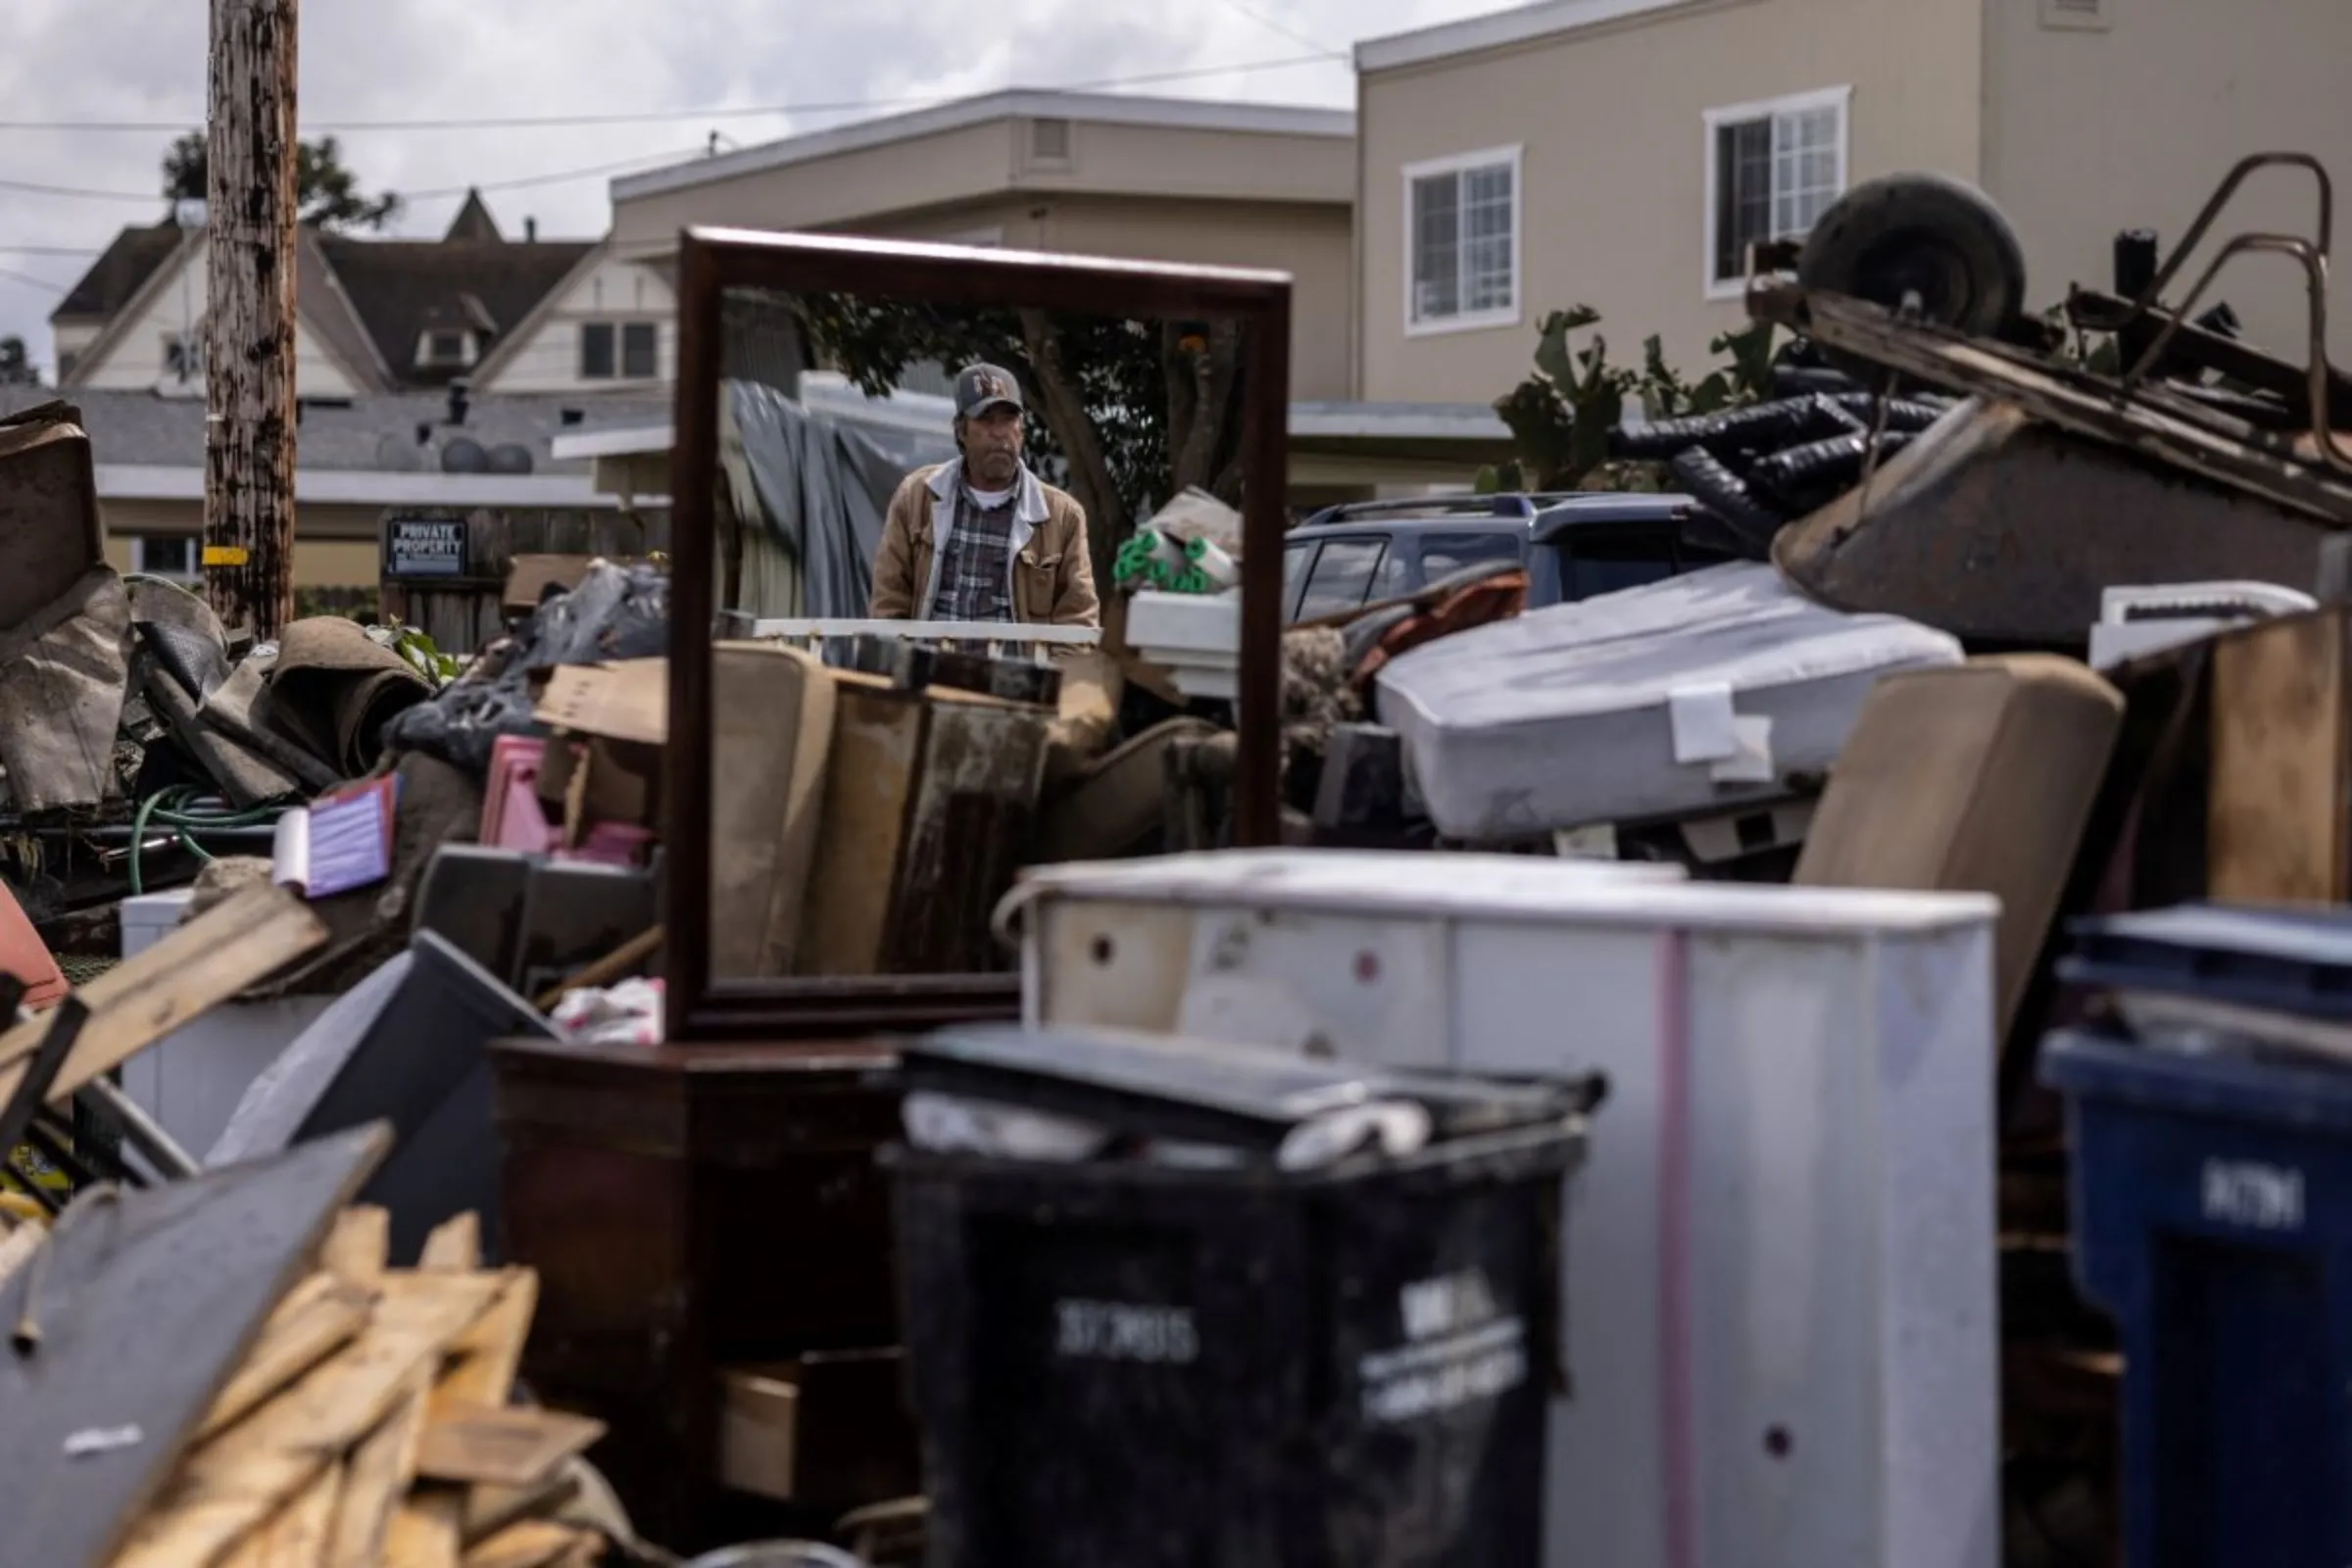 A man looks at a neighbor's damaged belongings after numerous rain storms flooded a residential area, in Pajaro, California, U.S., March 29, 2023. REUTERS/Carlos Barria